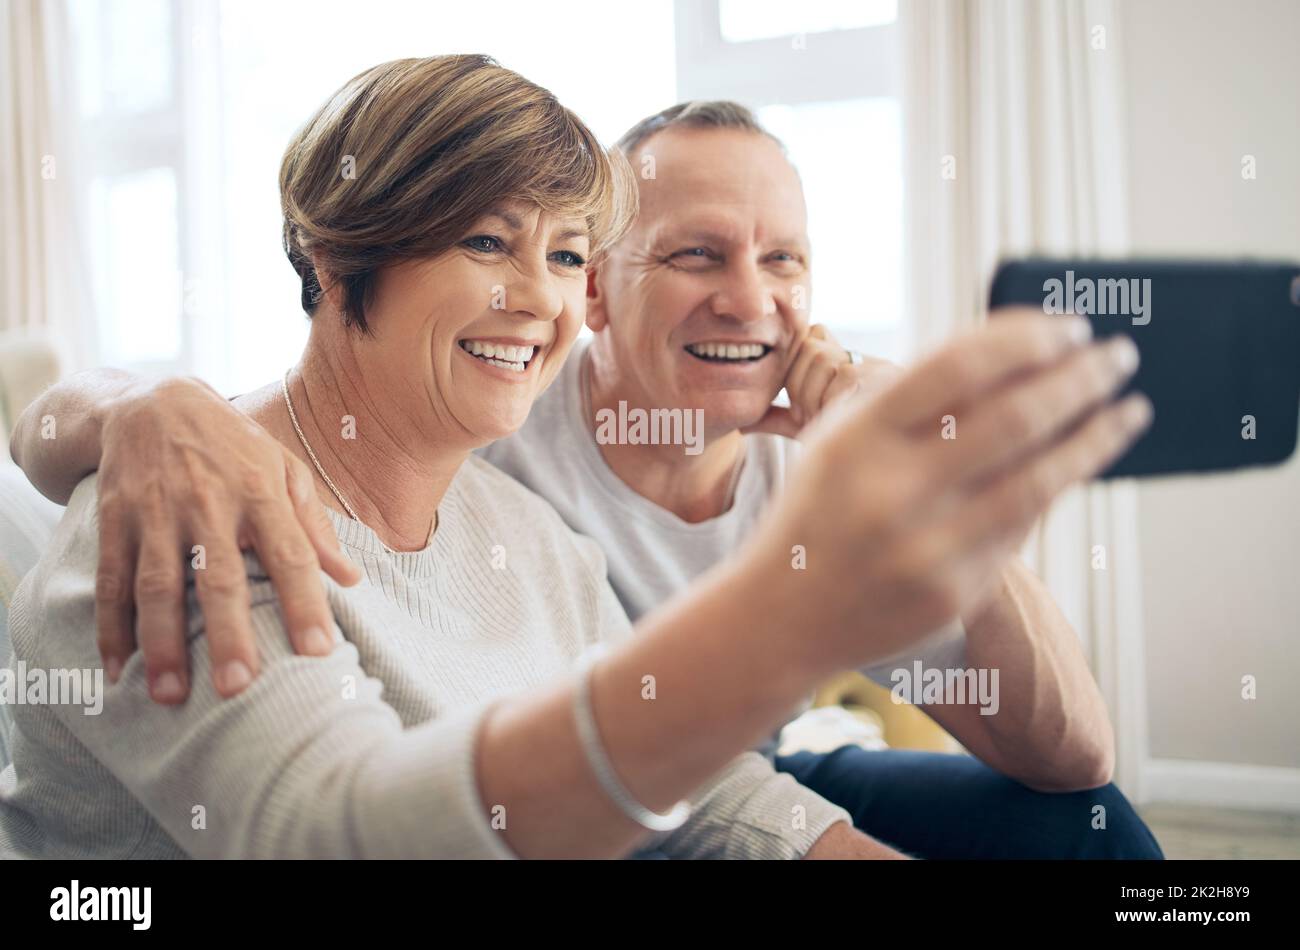 Your smile lights up my world. Shot of a mature couple taking selfies. Stock Photo